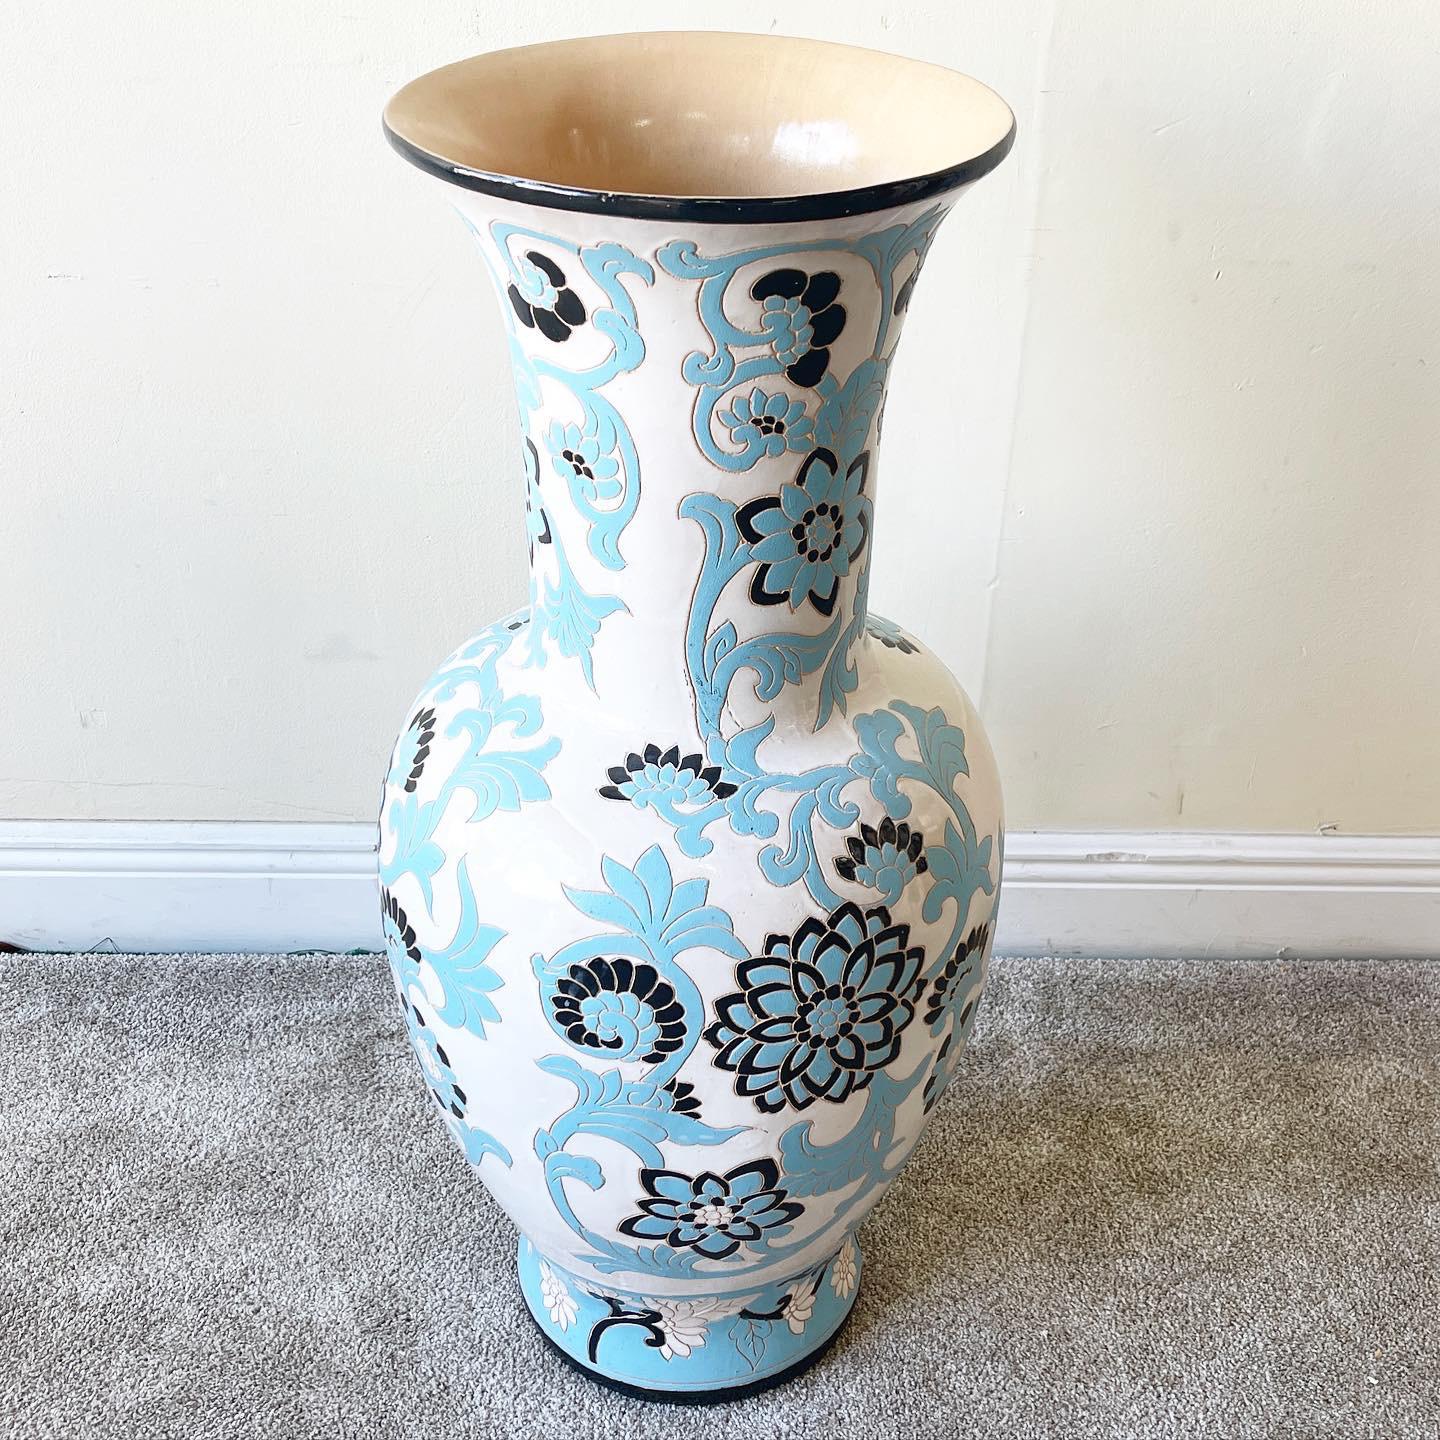 Incredible pottery floor vase. Glossy black and blue lotus flowers erupt over a white backdrop.
 